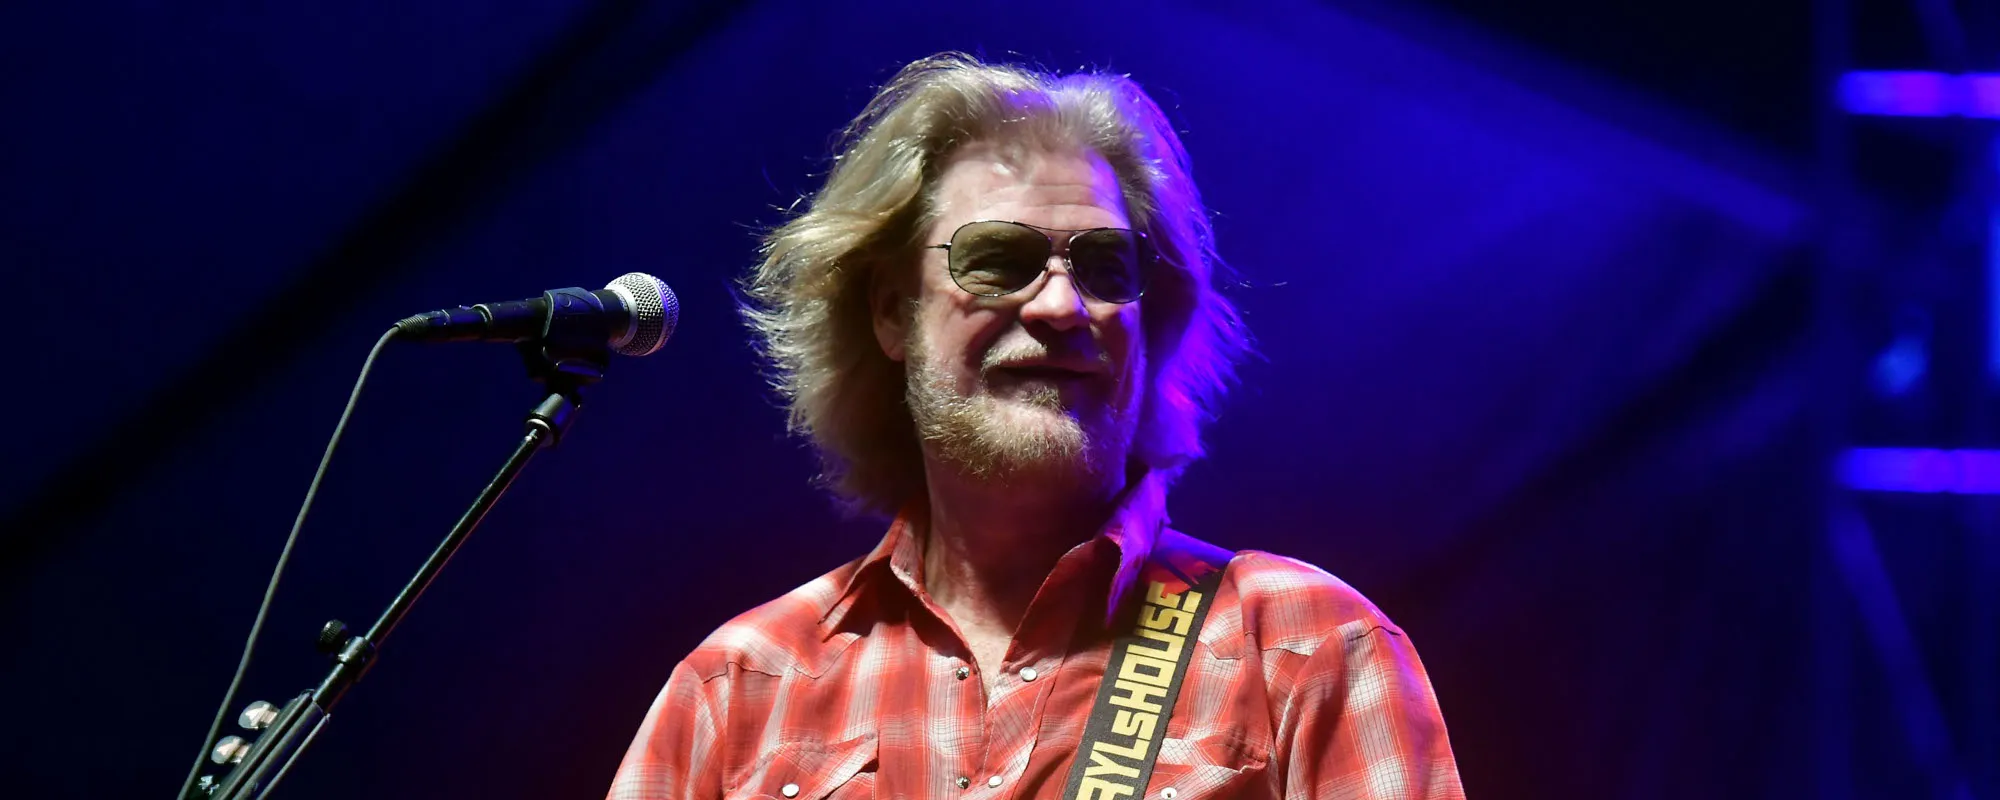 Daryl Hall Still Playing Hall & Oates Hits in Wake of Lawsuit Against Longtime Partner